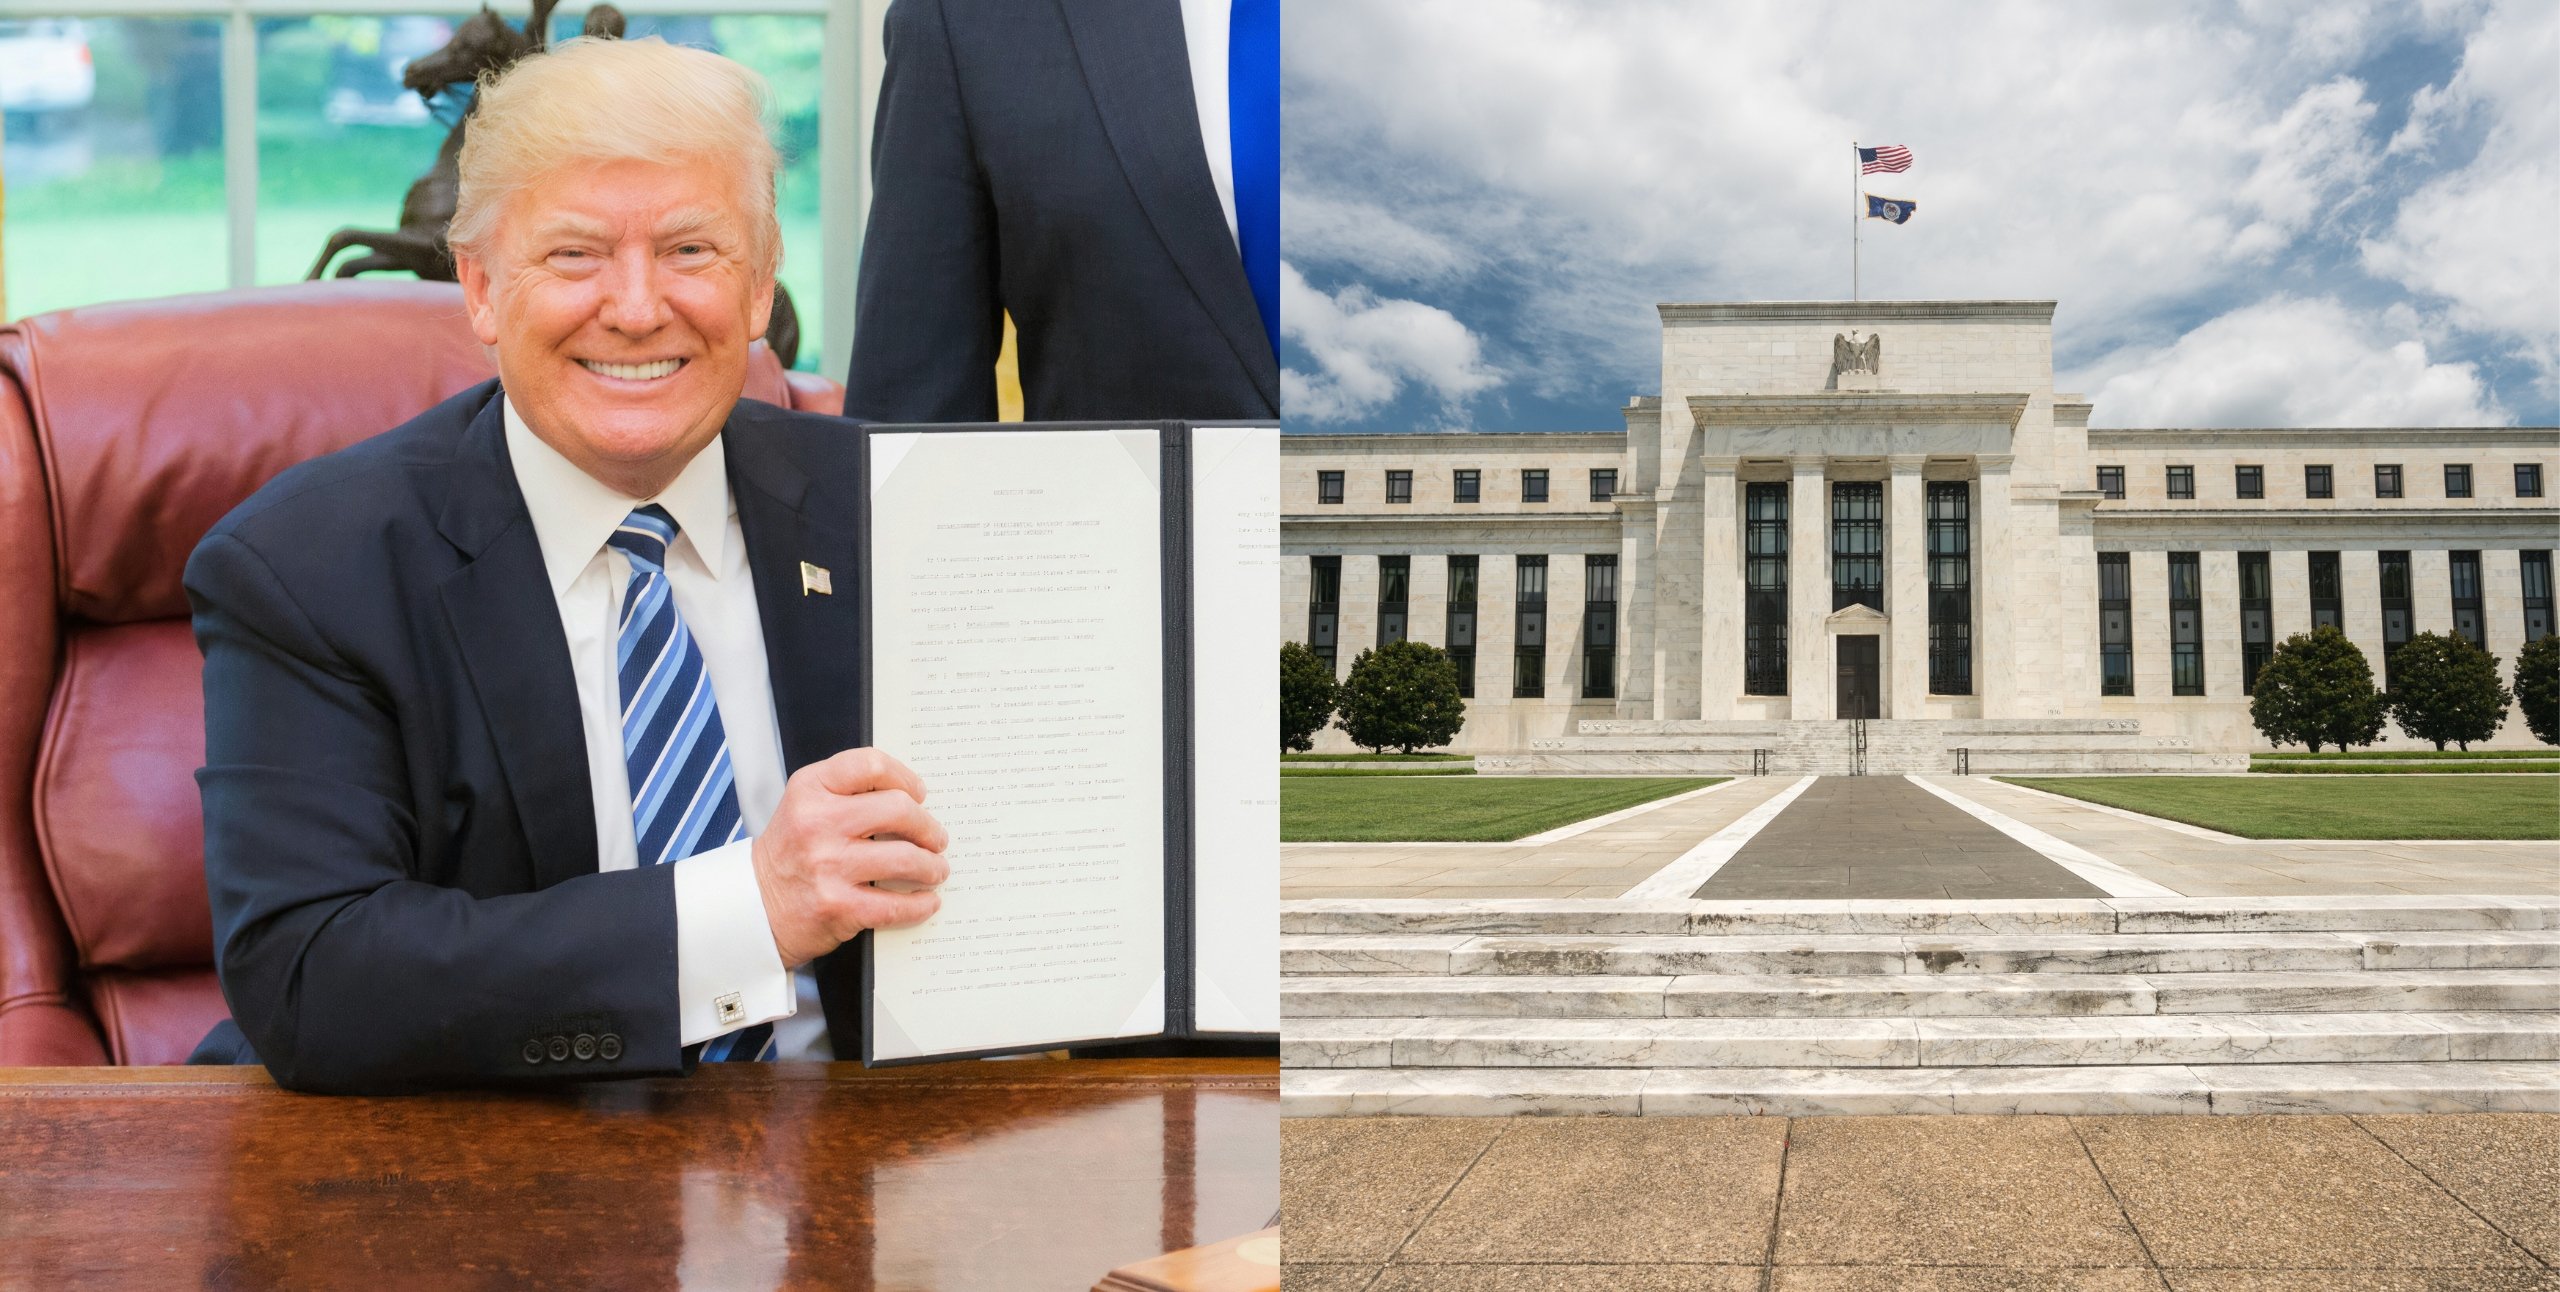 Trump and federal reserve